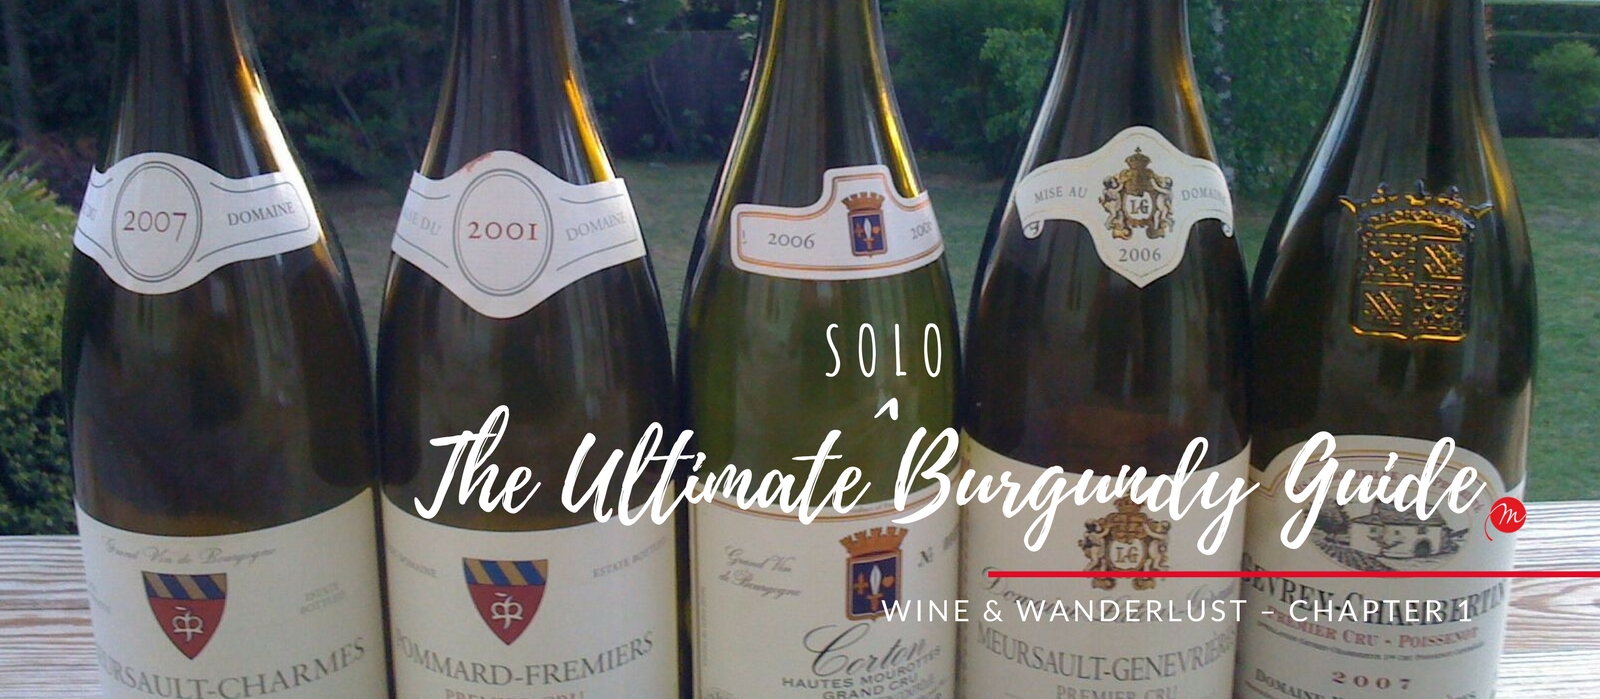 MyFrenchLife™ - MyFrenchLife.org – It all begins in Paris – Wine & wanderlust – the ultimate solo Burgundy Guide